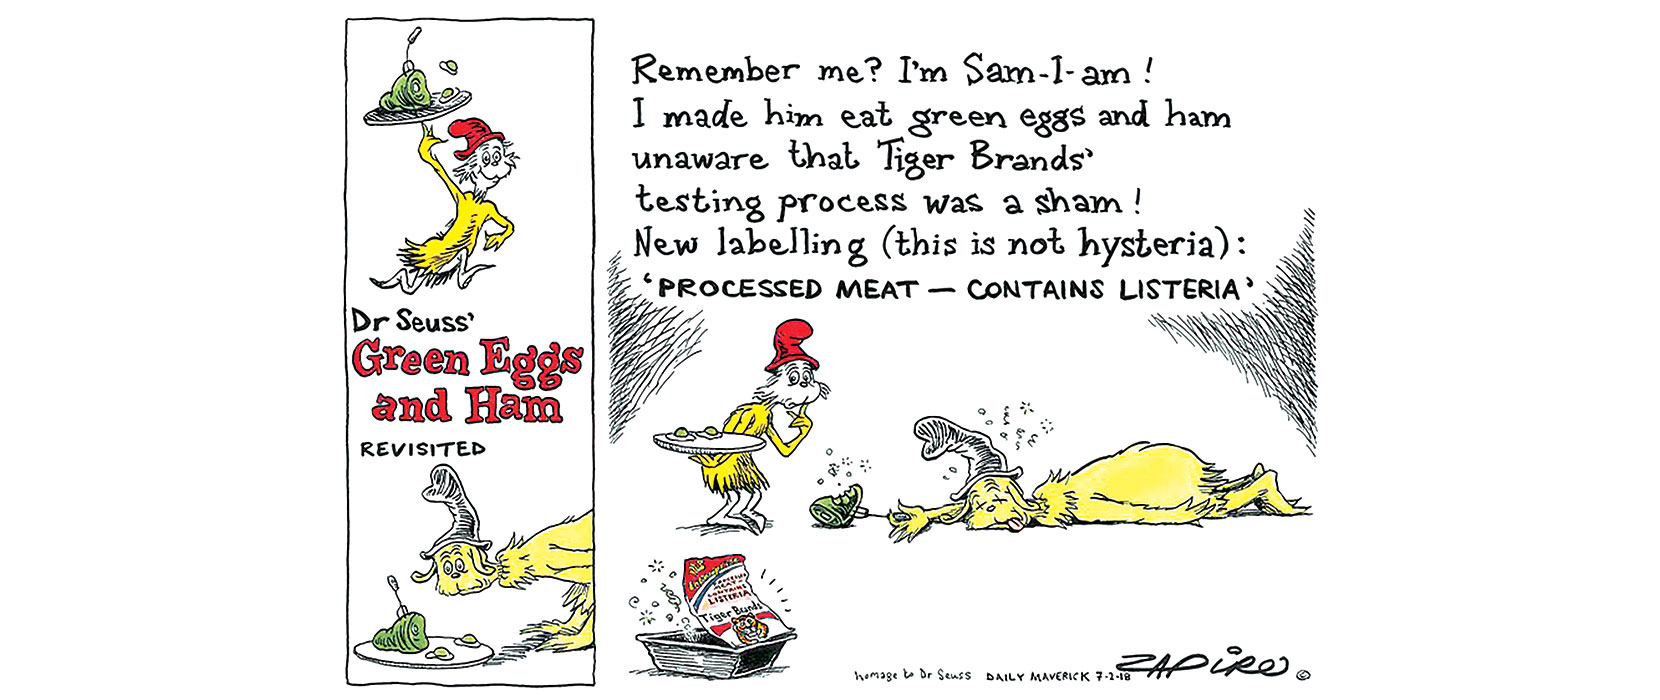 Dr Seuss' Green Eggs and Ham cartoon: 'Remember me? I'm Sam-I-am! I made him eat green eggs and ham unaware that Tiger Brands' testing process was a sham! New labelling (this is not hysteria): 'Processed meat — contains listeria'.